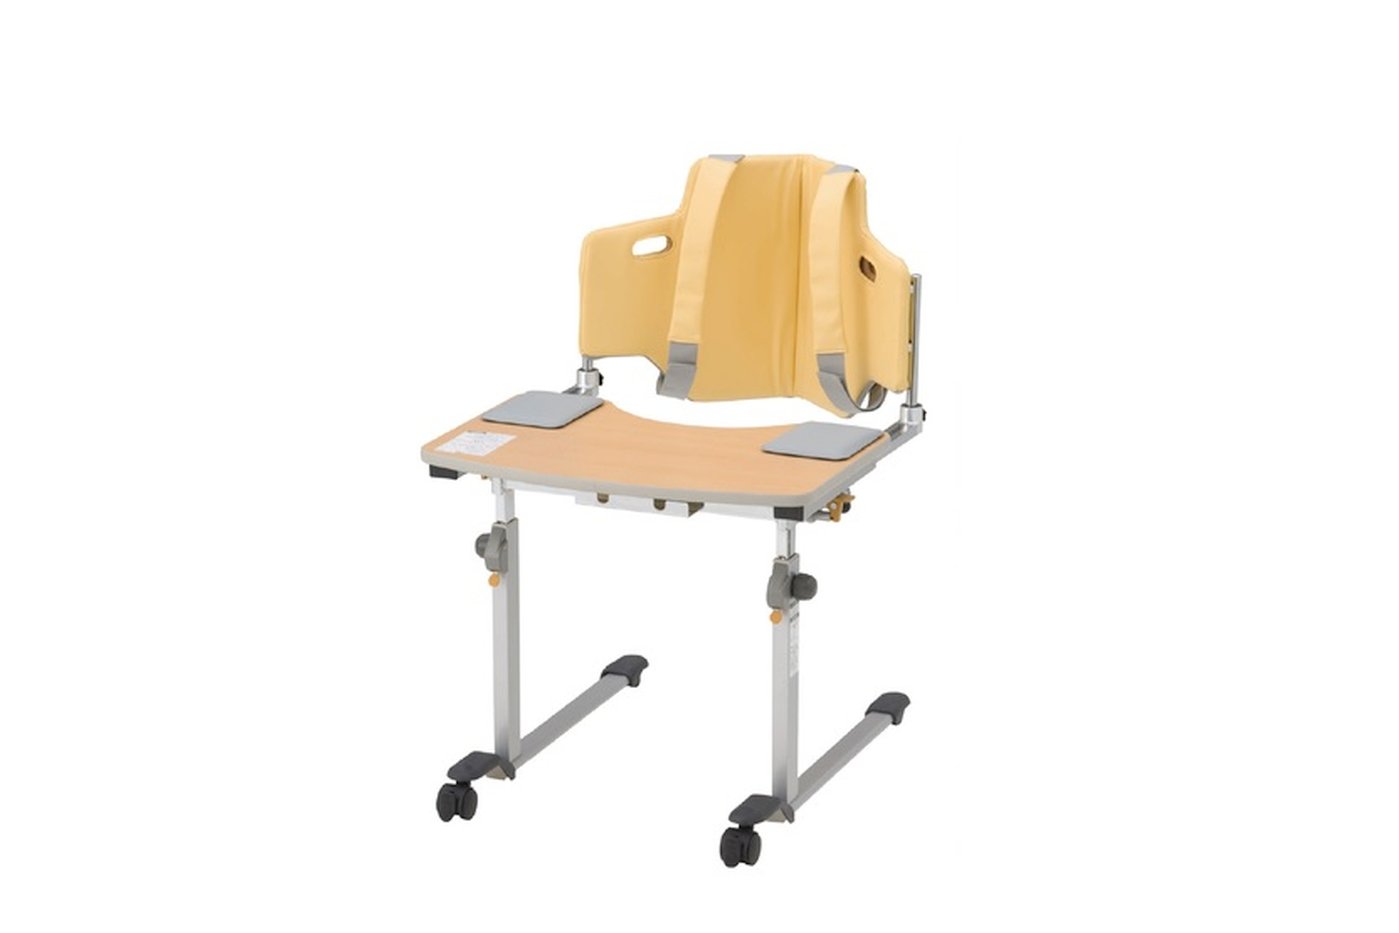 Sittan Rehab Table with table top in melamine-faced particle board in colour of maple, back cushion and support belts in yellow, height and depth adjustable table on steel legs with 2 front caster wheels, and 2 elbow pads in grey on each side of the table top.